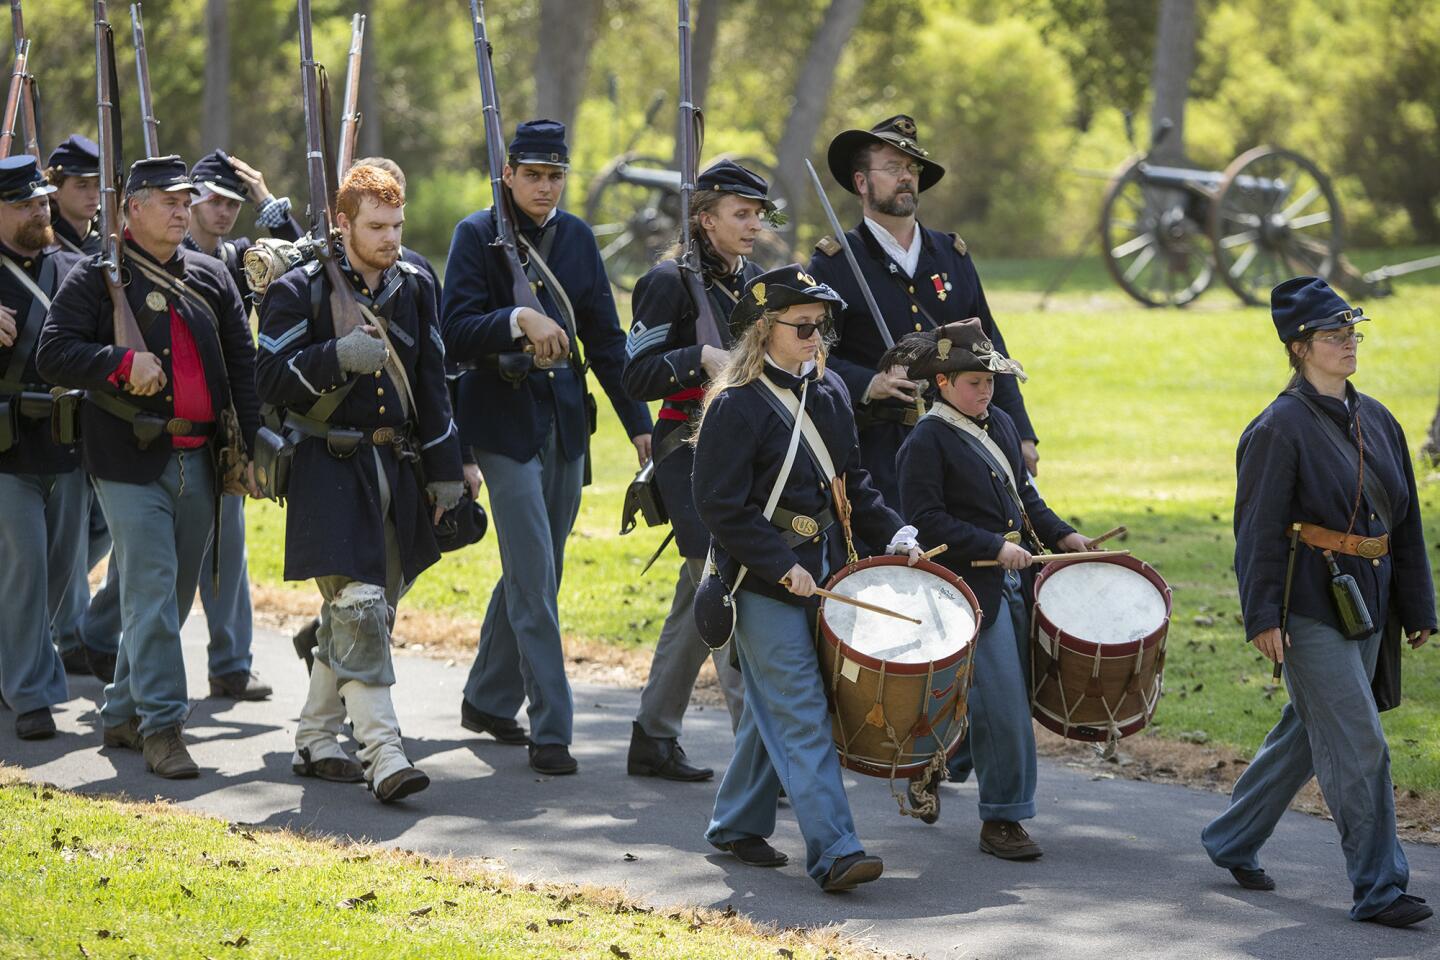 Photo Gallery: 24th annual Civil War Days Living History Event in Huntington Beach